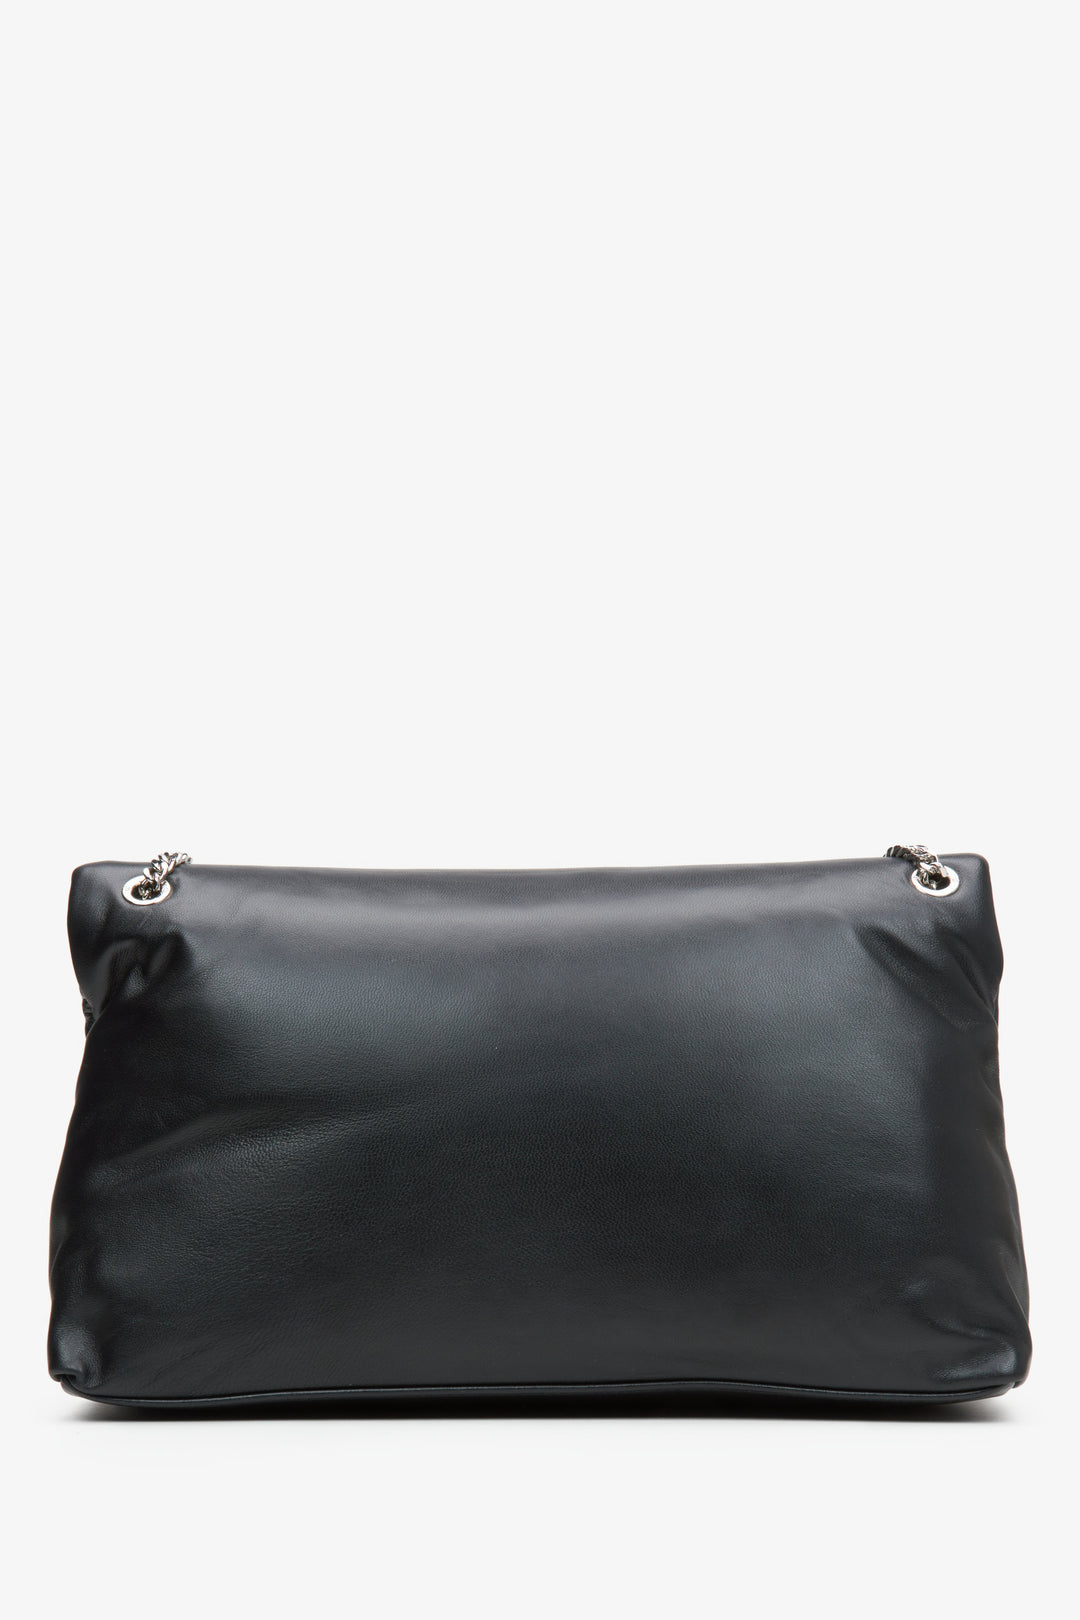 Compact women's black handbag with a chain strap - back side.